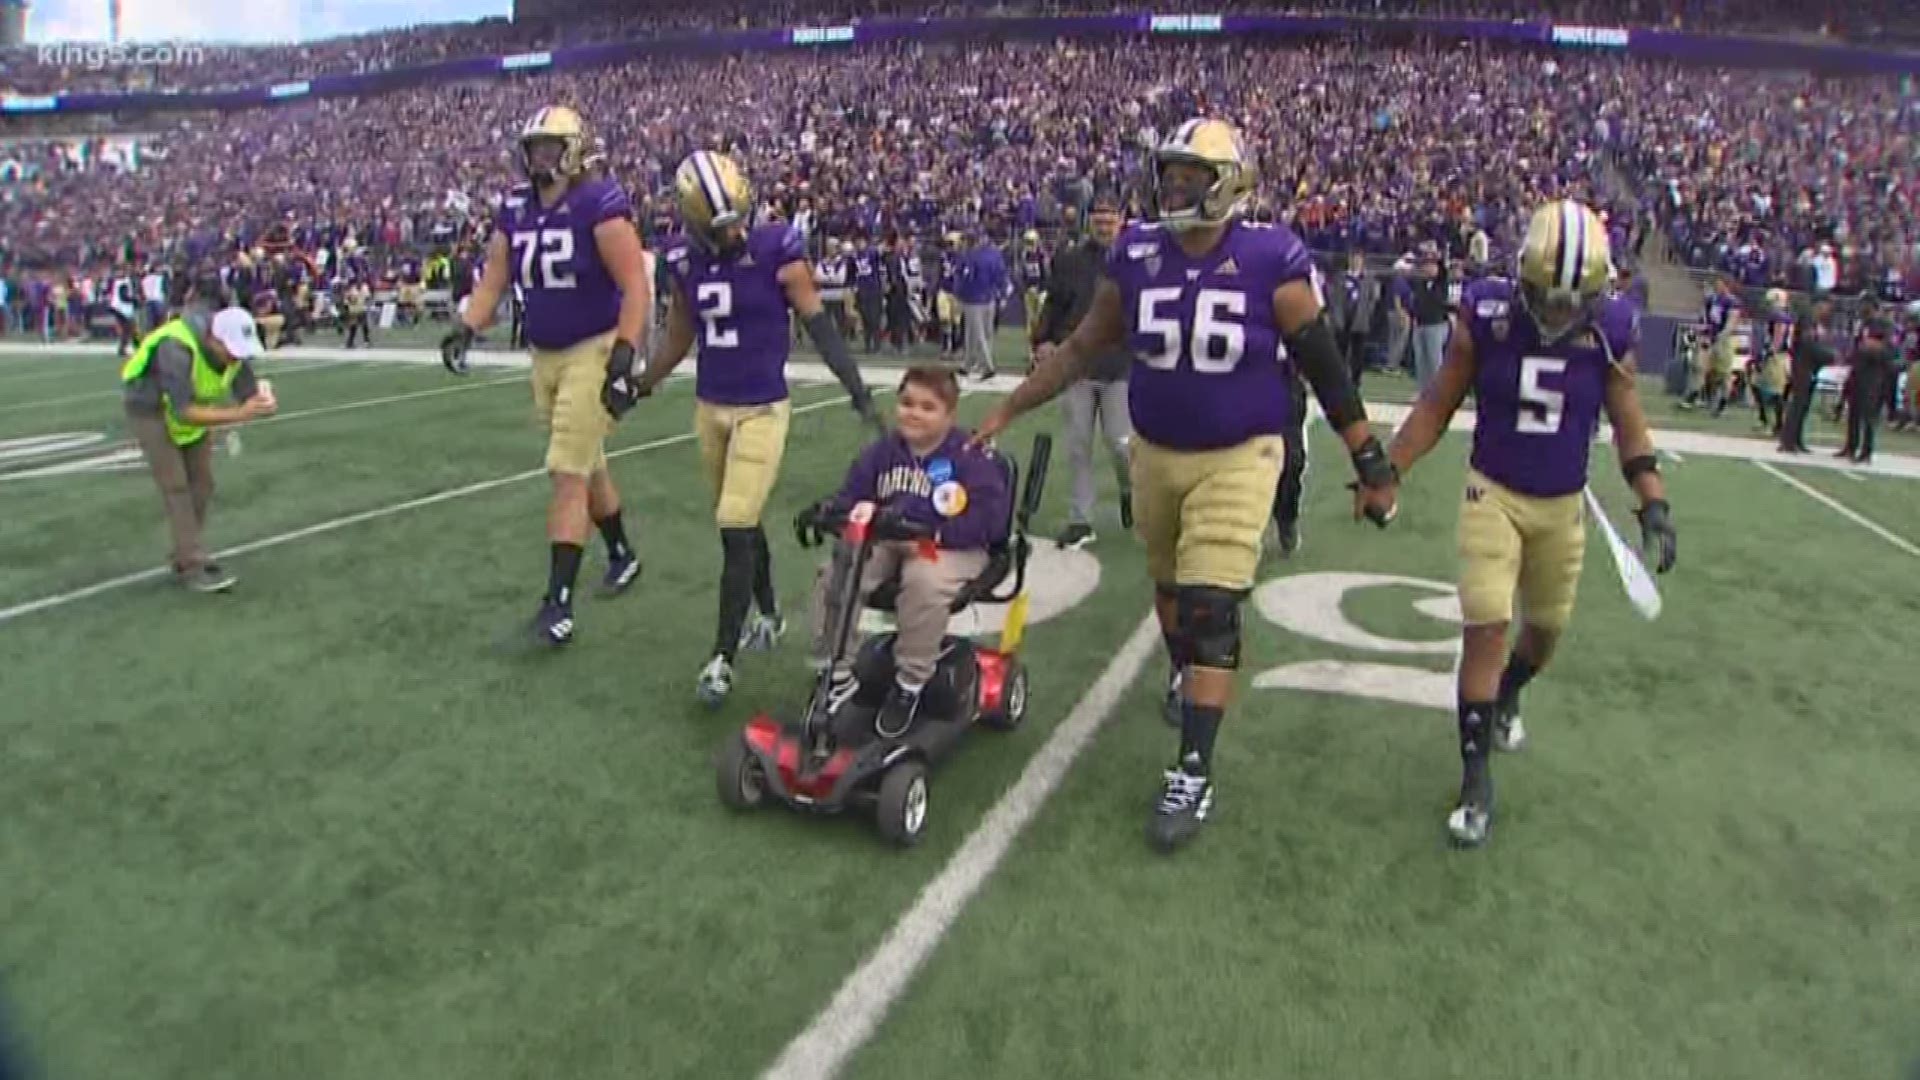 The UW football team found inspiration from a special fan on Saturday. KING 5's Amy Moreno introduces us to 13-year-old Peyton, who is battling muscular dystrophy.